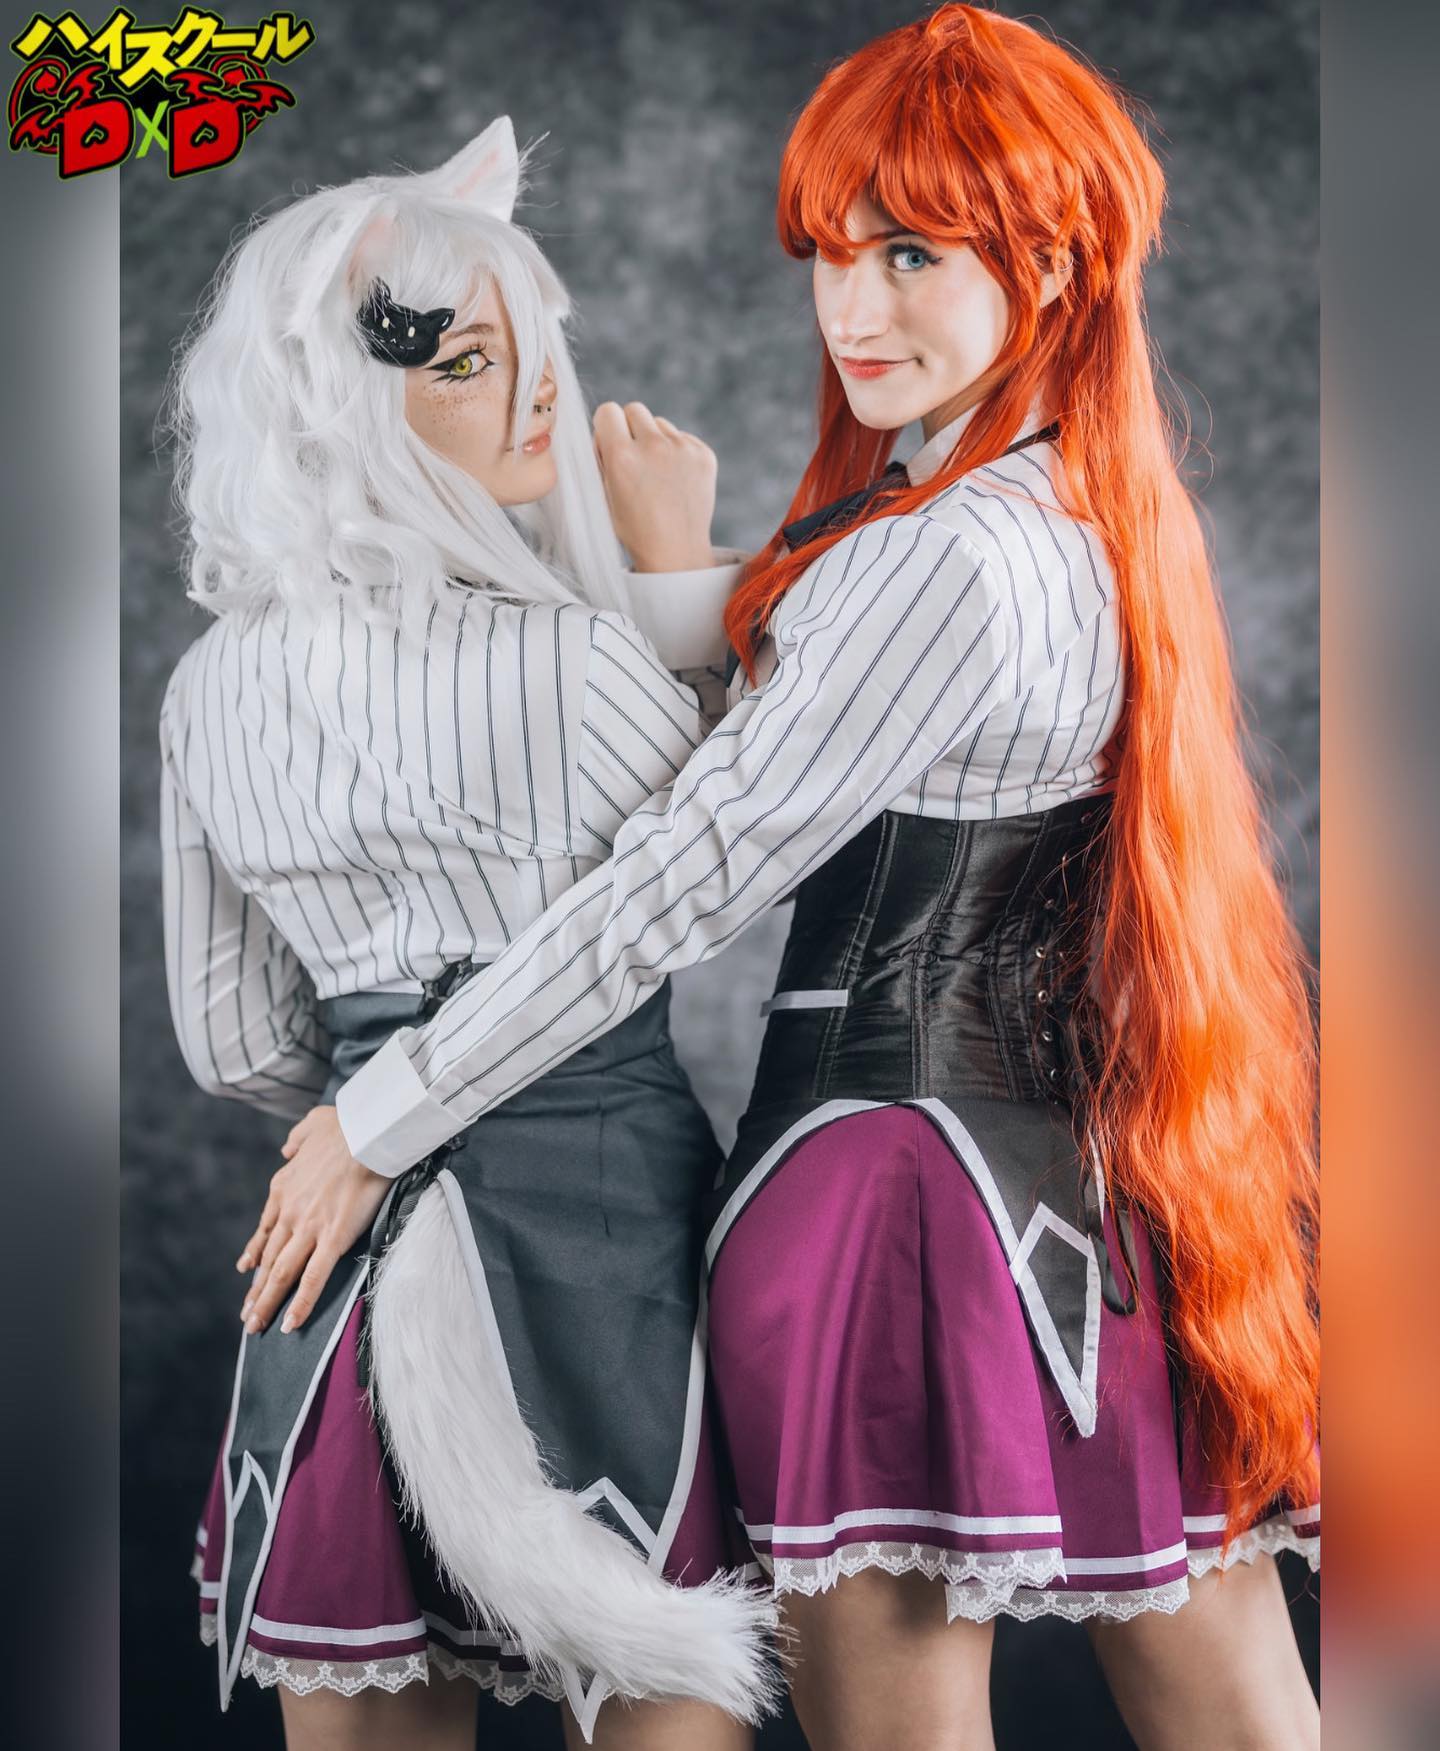 nya :3
-
koneko tojo at the @polarisconvention ! me and @pinkteddy.cos decided to cosplay from highschool dxd (even though the anime is as old as my great grandpa) and it was soo fun :3 
-
pictures taken by @eosandy_ !🫶
-
#cosplay #cosplayer #cosplaying #cosplaygirl #highschooldxd #hdxd #highschooldxdedit #highschooldxdcosplay #koneko #konekotojo #konekocosplay #rias #riasgremory #riasgremorycosplay #riascosplay #anime #animecosplay #mangacosplay #viral